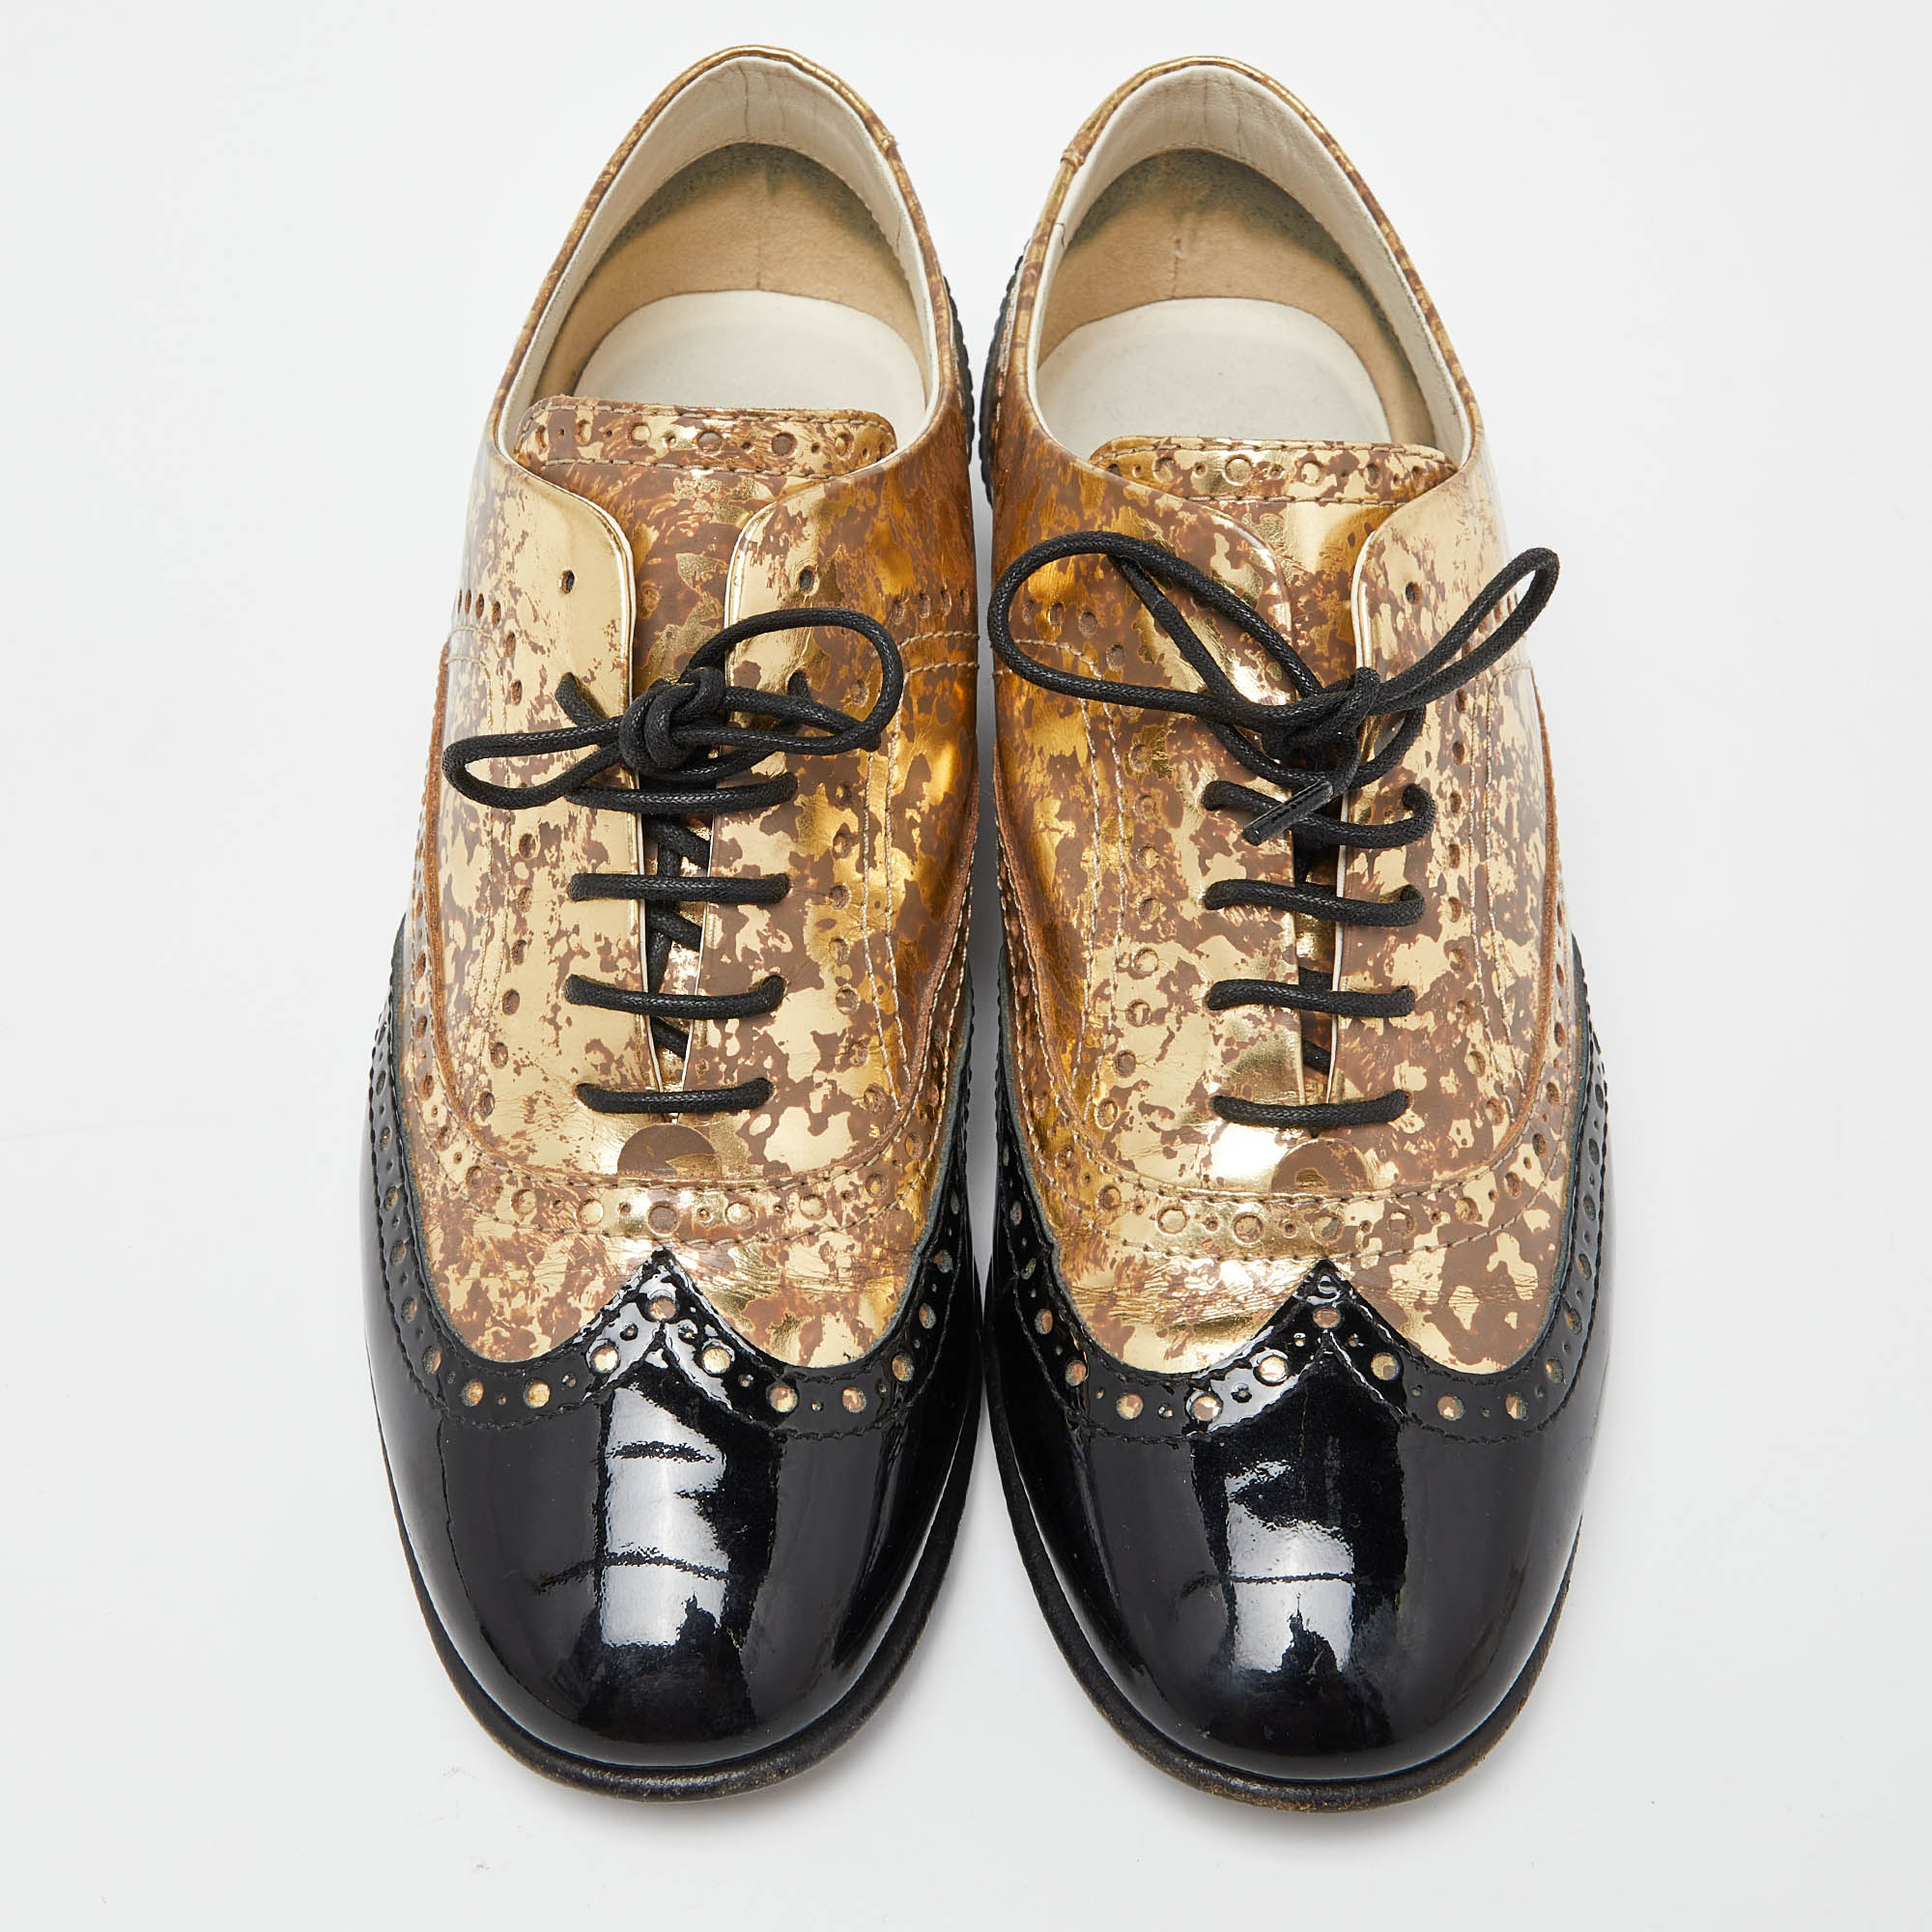 Chanel Metallic Gold/Black Patent Leather Brogue Lace-Up Oxford  Size 37